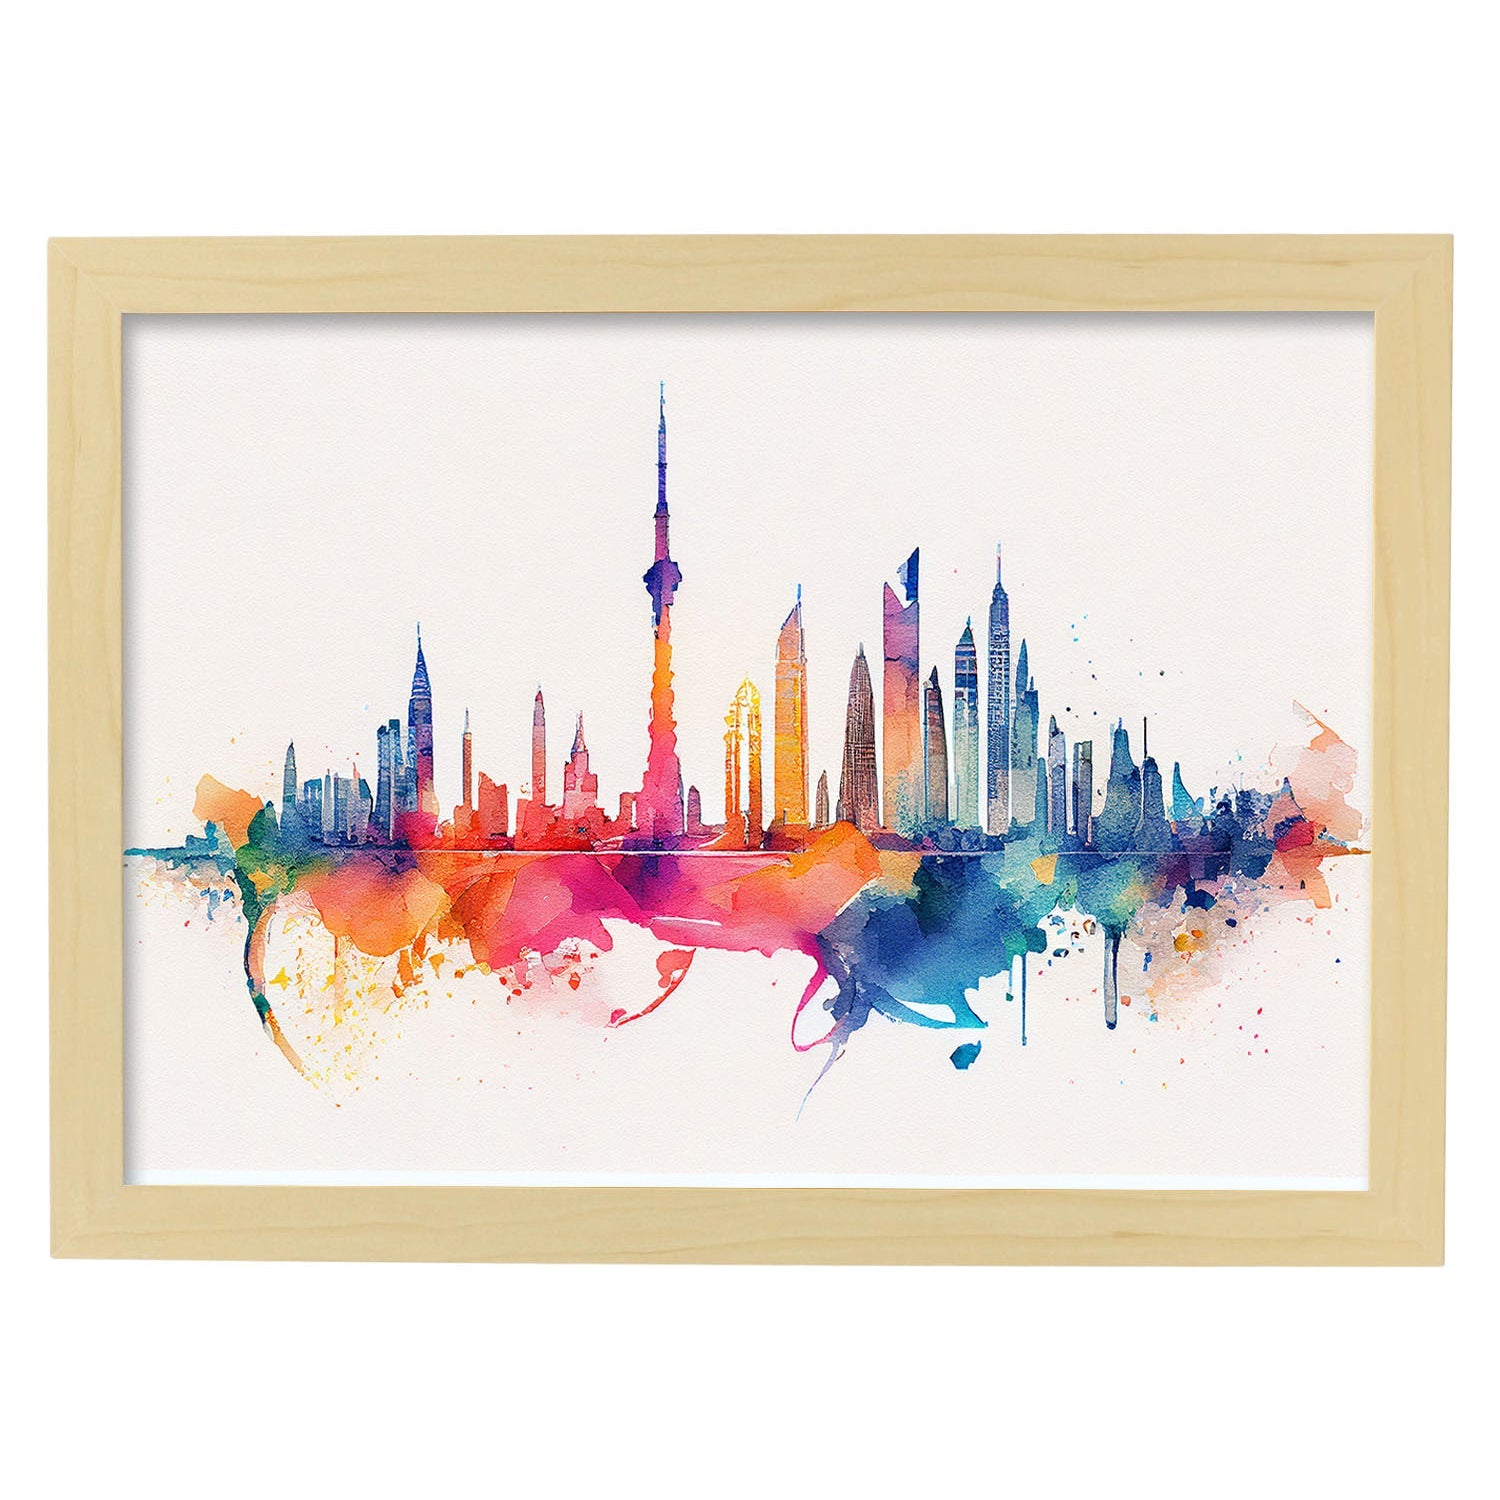 Nacnic watercolor of a skyline of the city of Dubai. Aesthetic Wall Art Prints for Bedroom or Living Room Design.-Artwork-Nacnic-A4-Marco Madera Clara-Nacnic Estudio SL